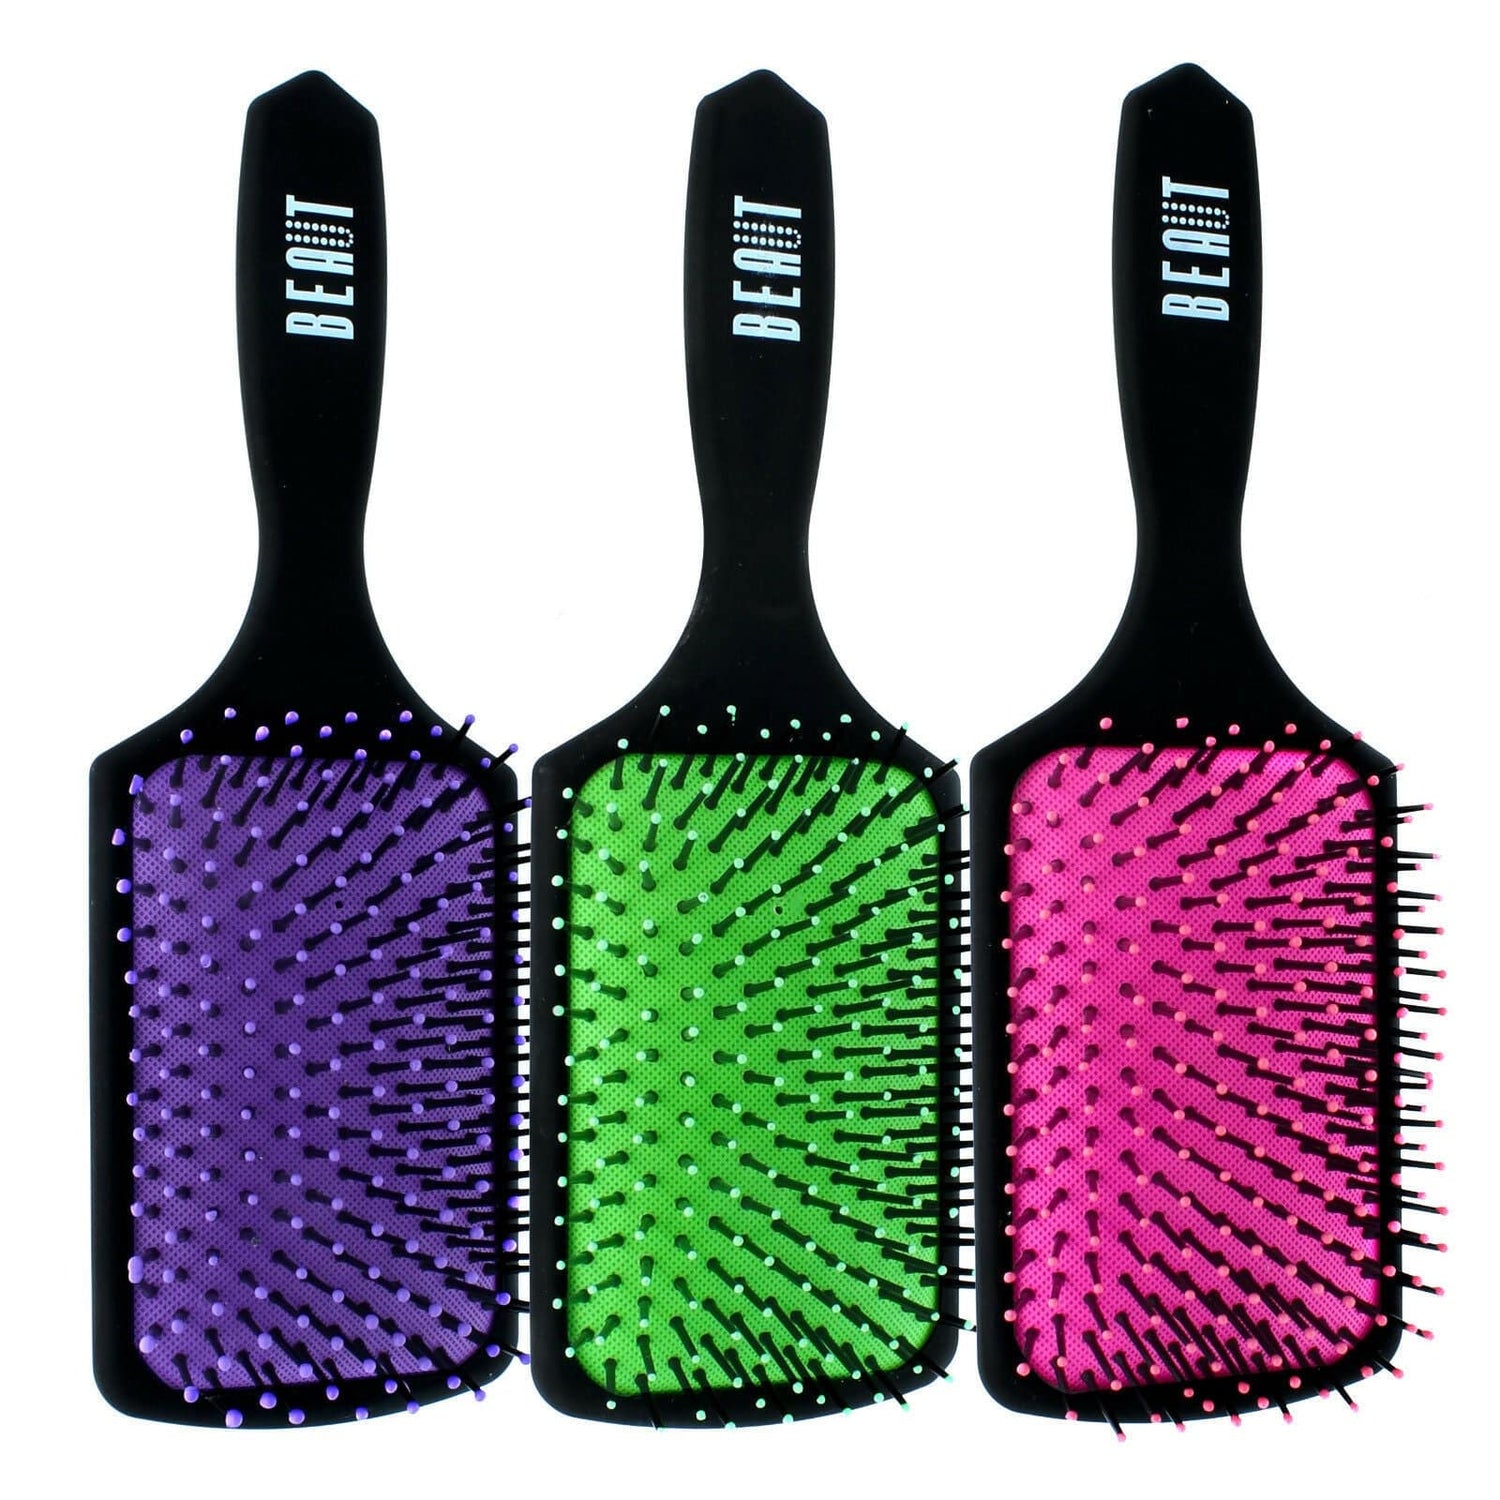 BEAUT WET AND DRY DETANGLING BRUSH - VIP Extensions